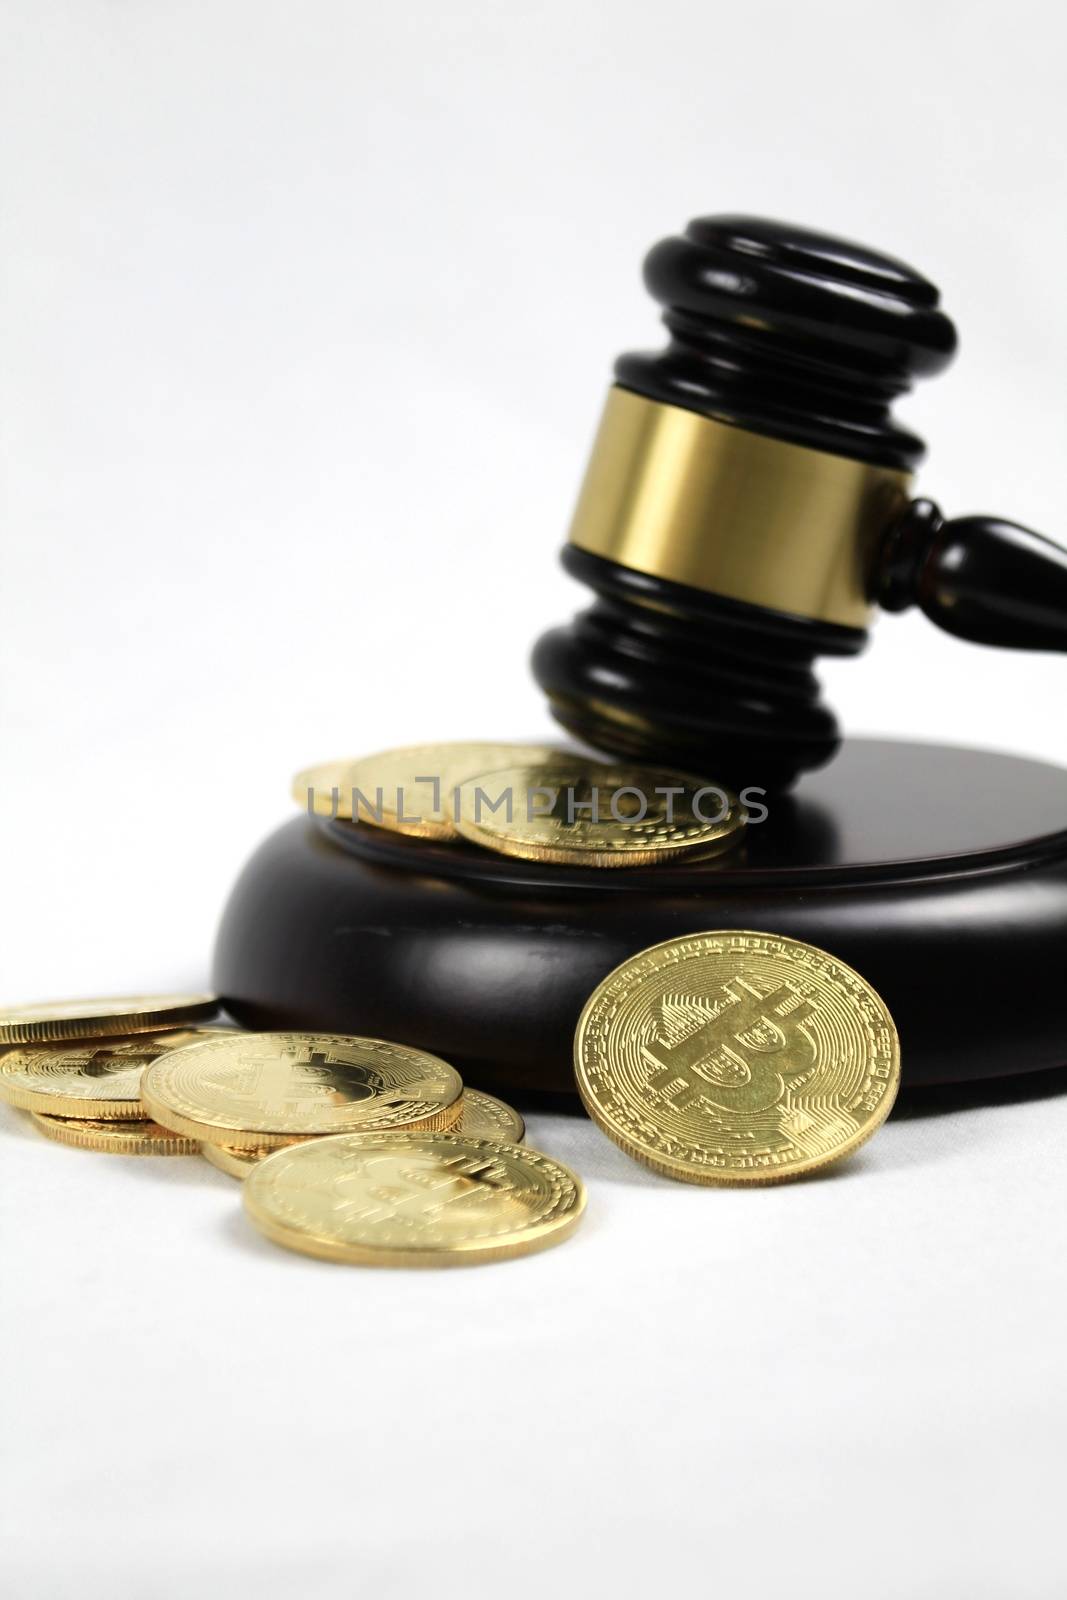 Golden bitcoins and judge gavel by soniabonet